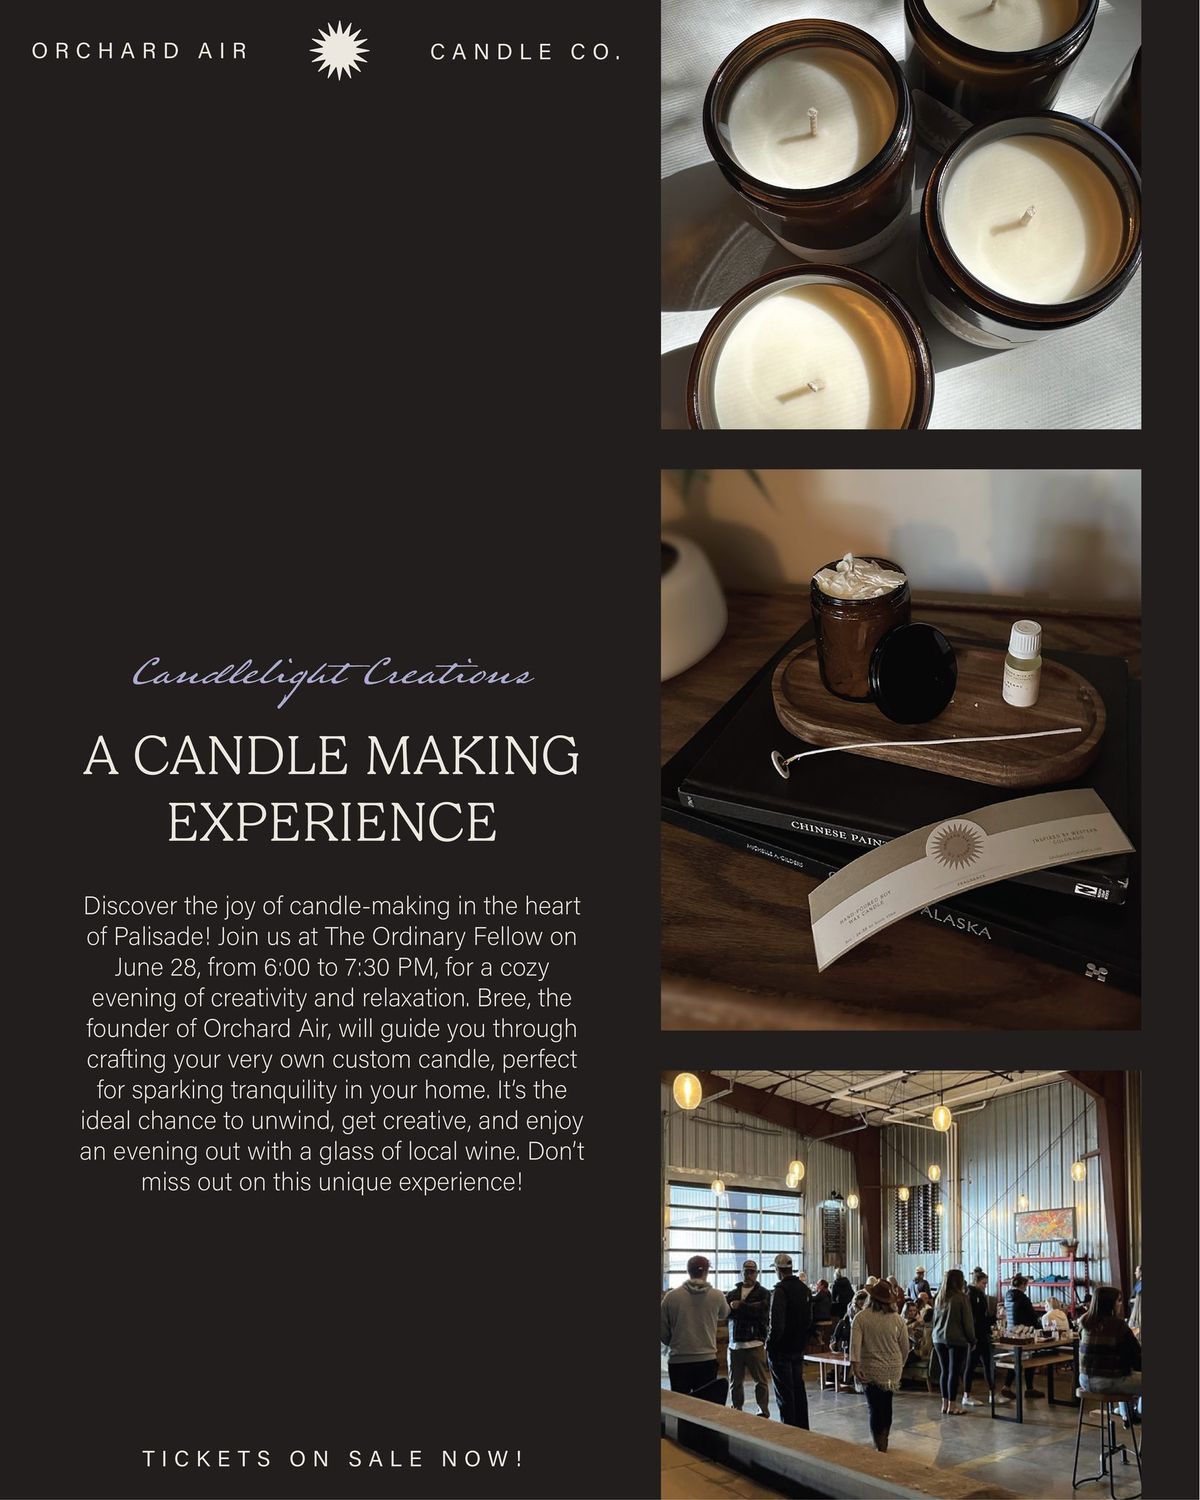 Candlelight Creations: A Candle Making Event